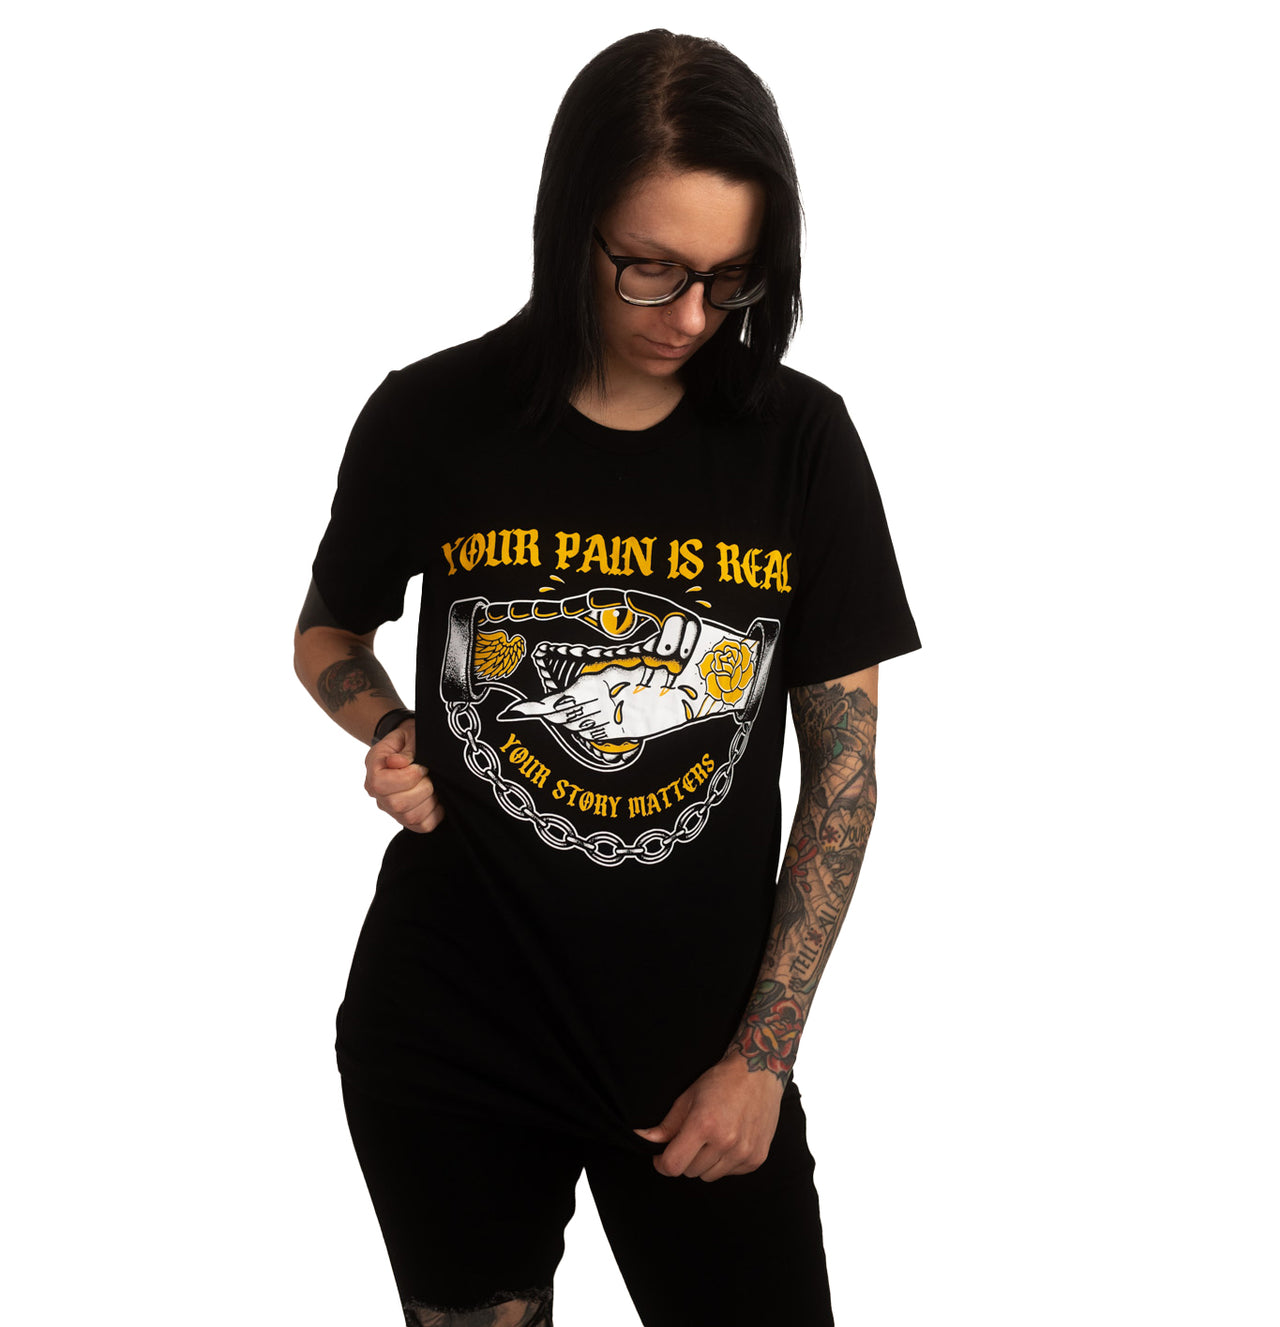 Your Pain is Real Tee